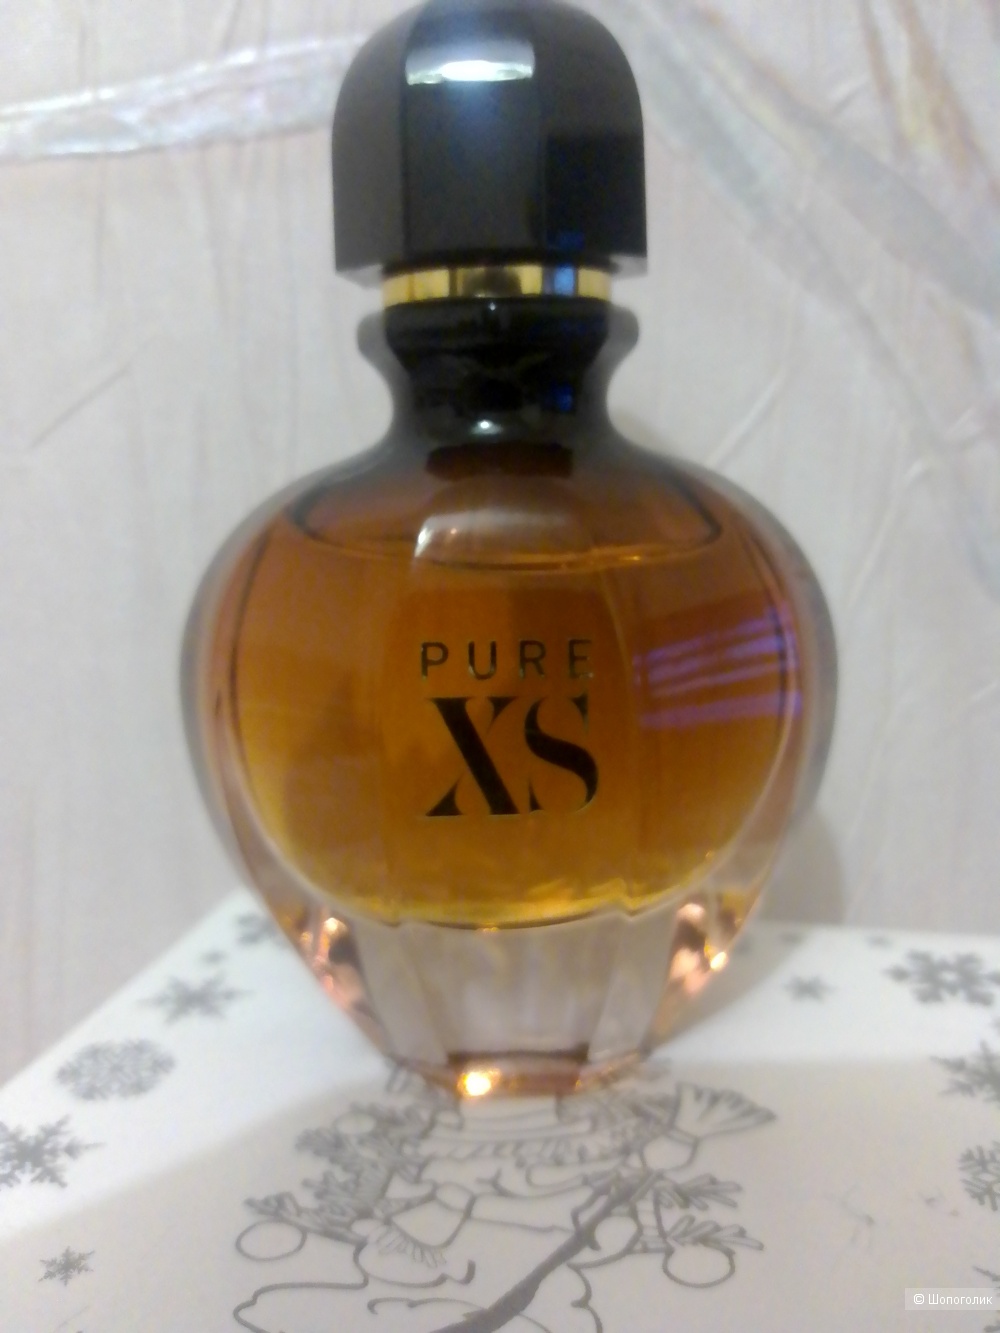 Парфюрмерная вода Paco Rabanne Pure XS For Her 30 ml